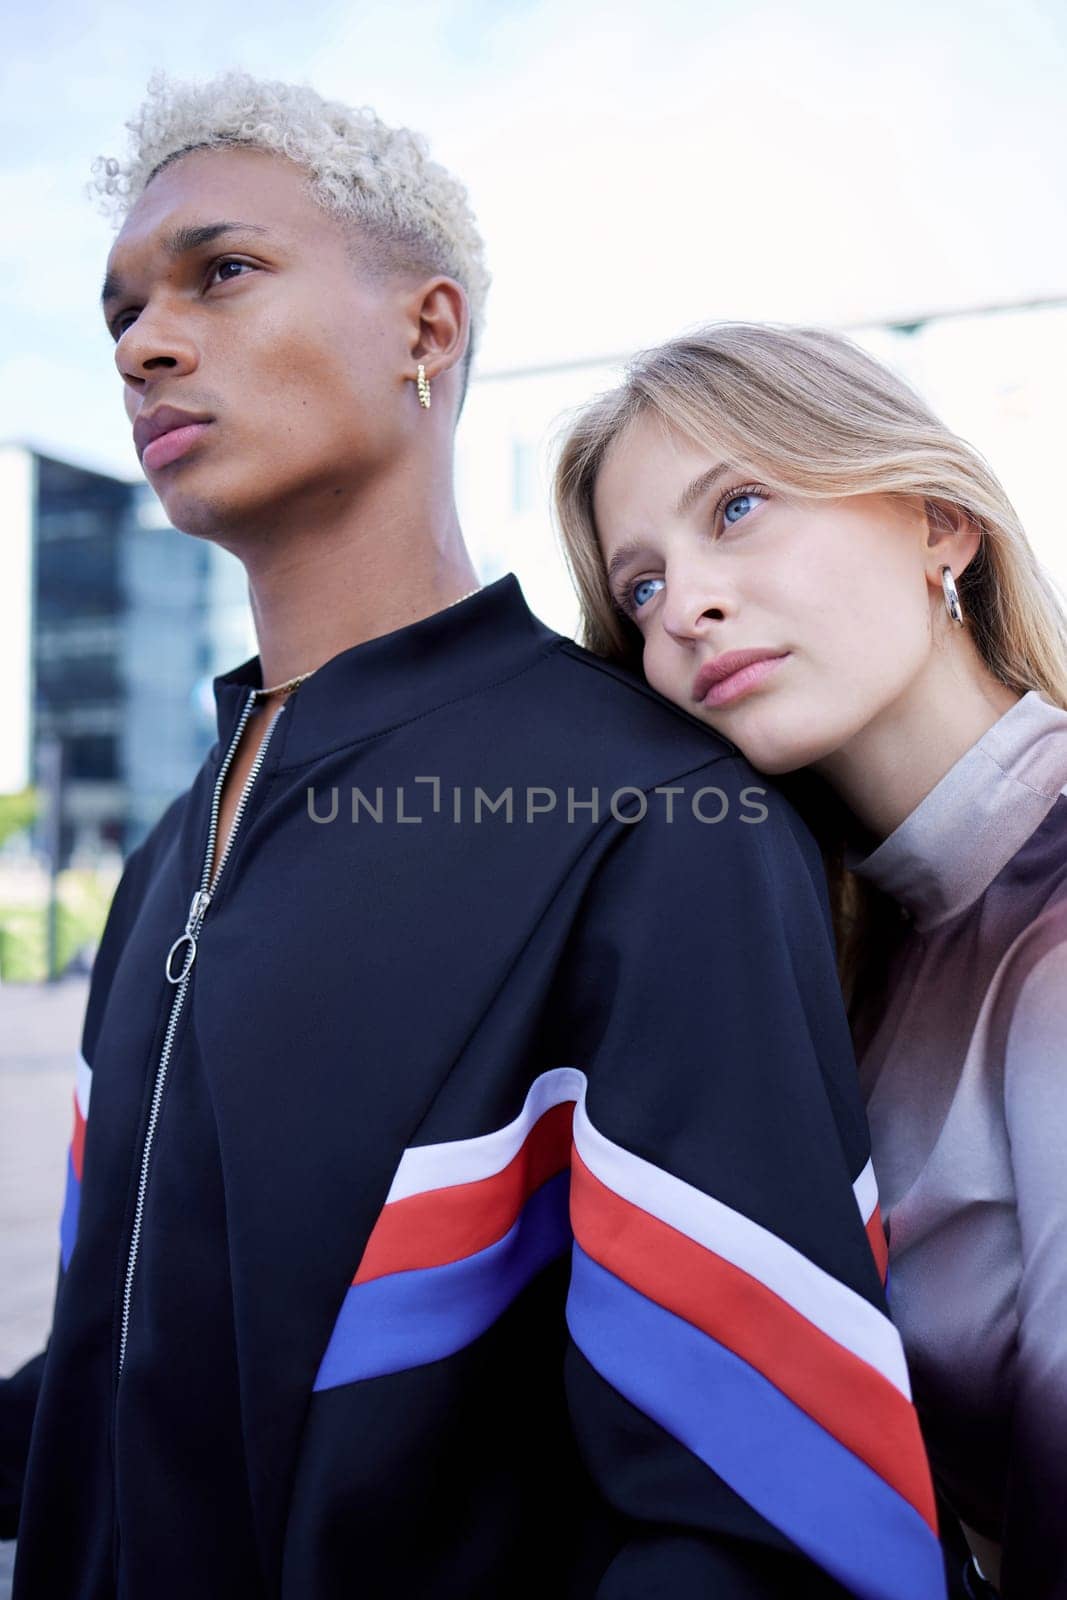 Couple love, serious and street fashion modern gen z or edgy millennial style in city together. Young man and woman, diverse fashionable friends and cool trendy youth outdoor designer wear lifestyle.